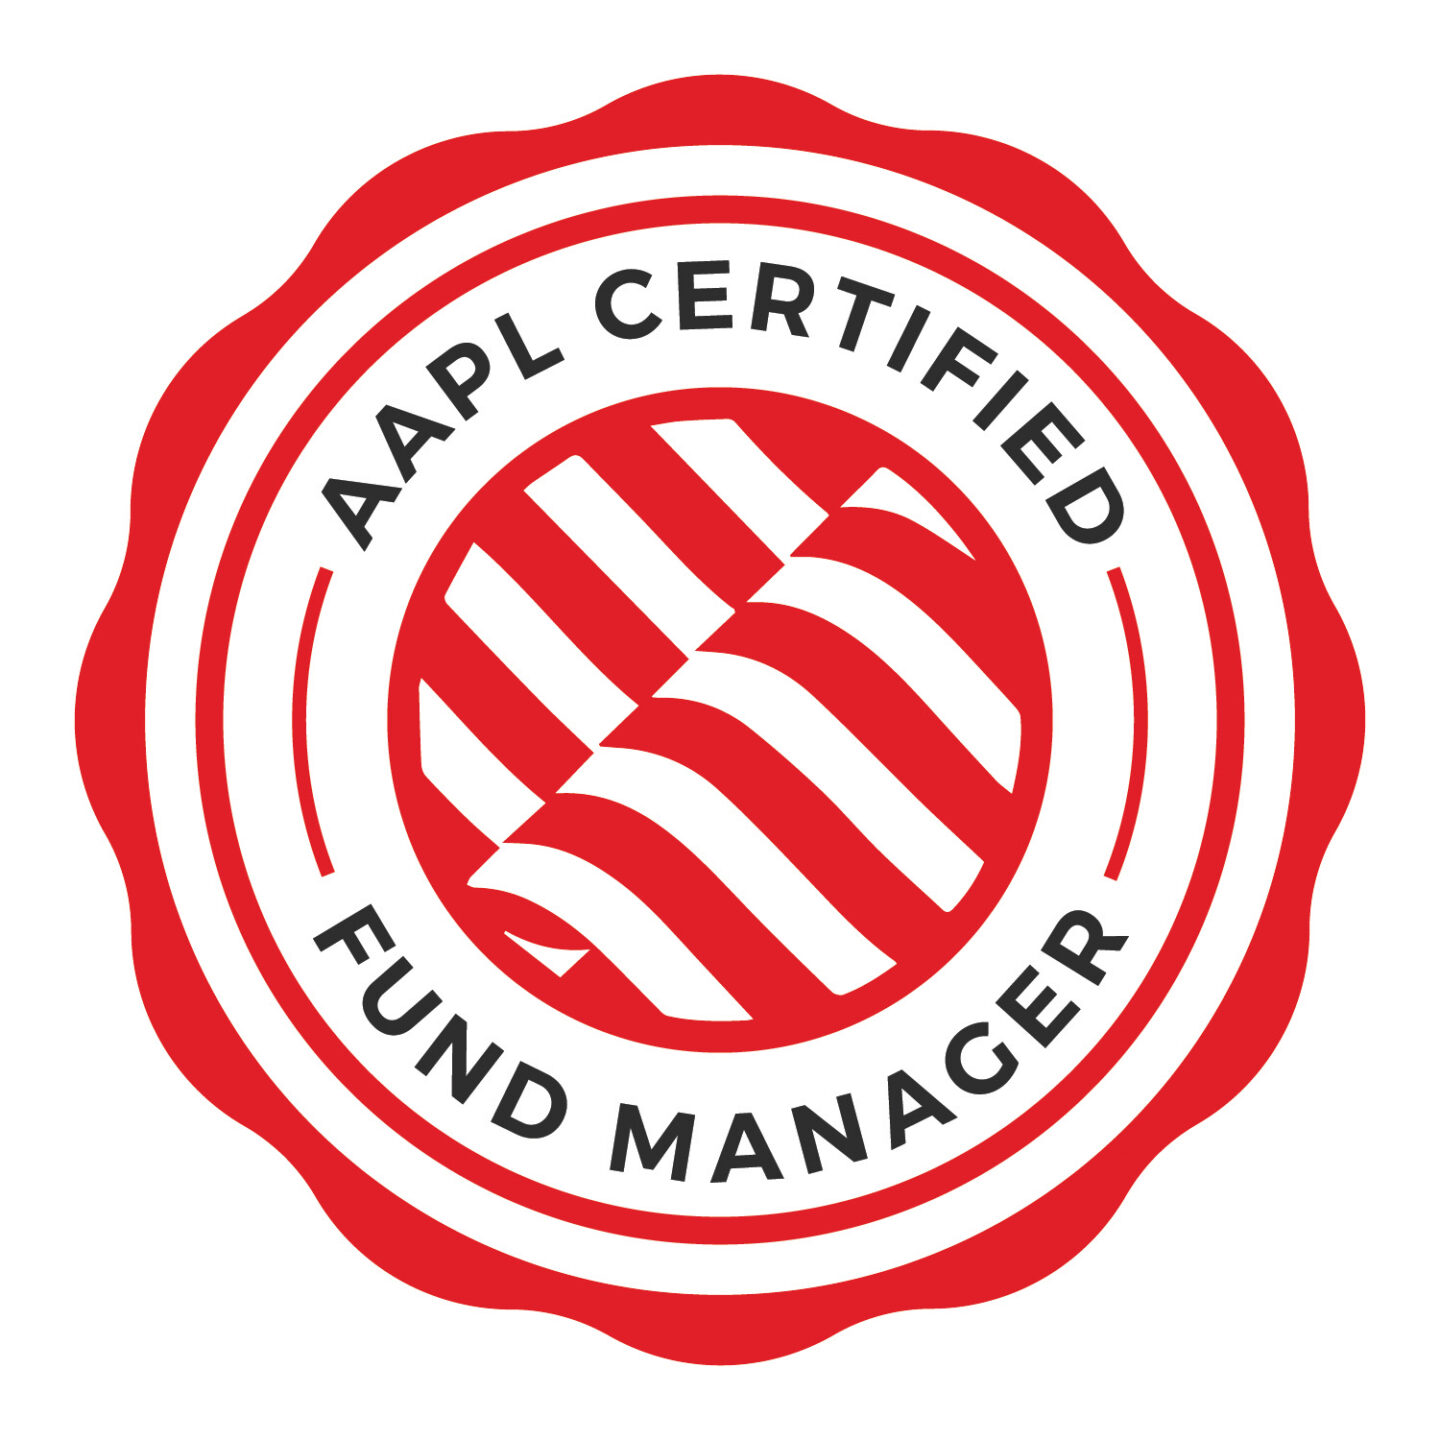 Certified Fund Manager